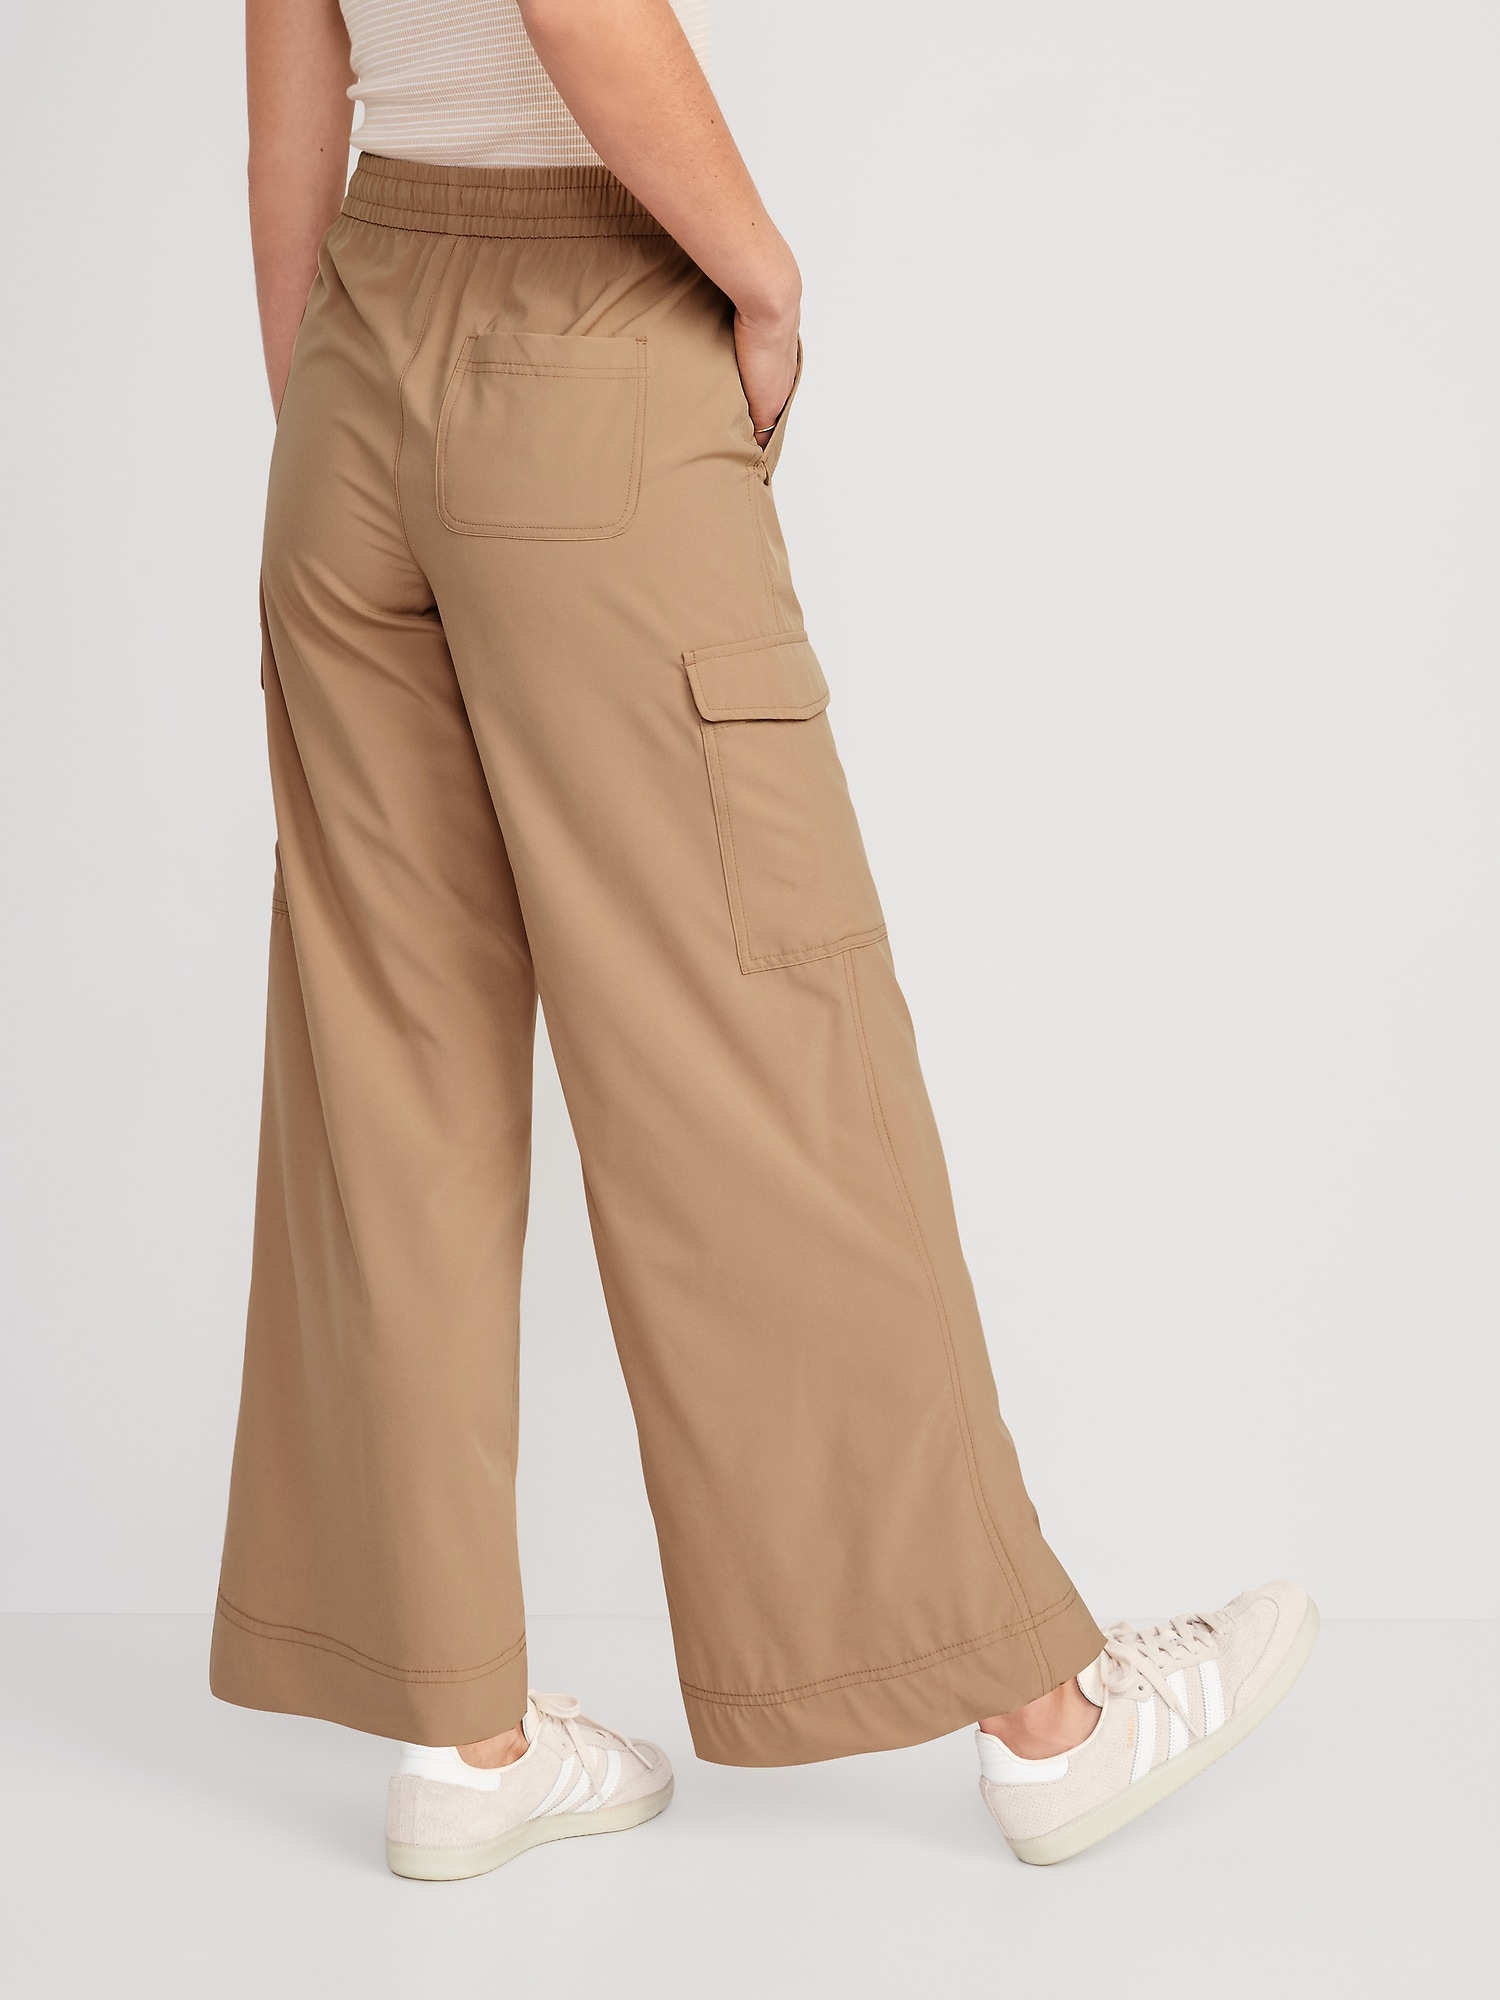 Forever 21 Contrast Stitching Utility Womens Mid Rise Wide Leg Cargo Pant-Juniors  - JCPenney